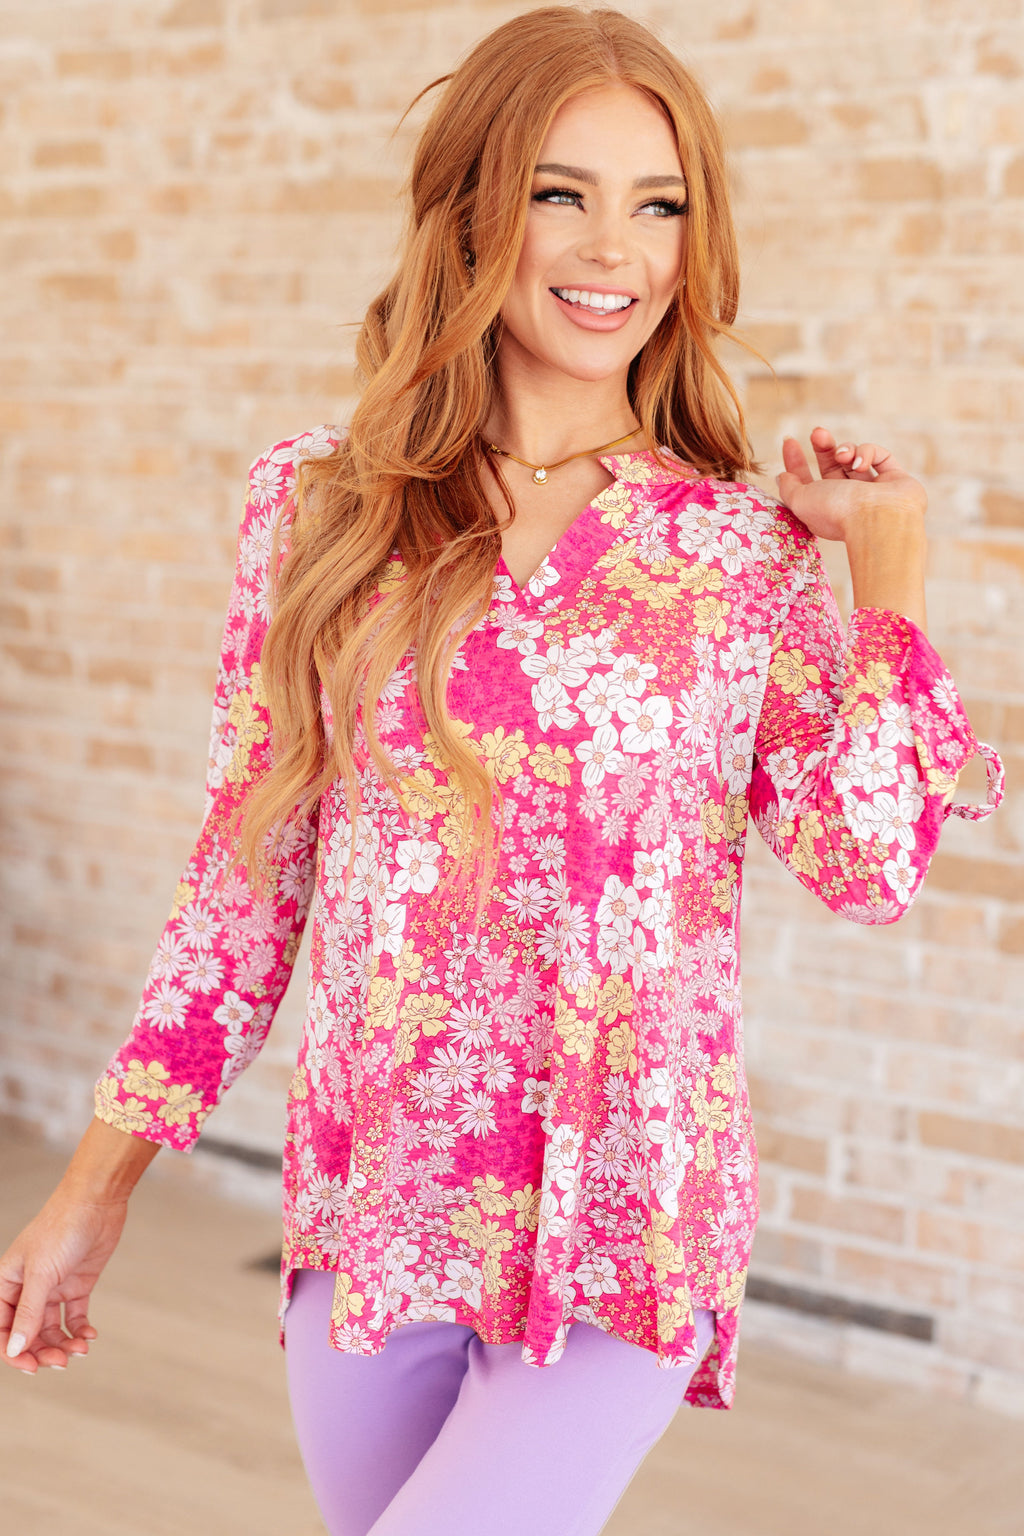 Hazel Blues® |  Lizzy Top in Hot Pink and Bubblegum Pink Ditsy Floral